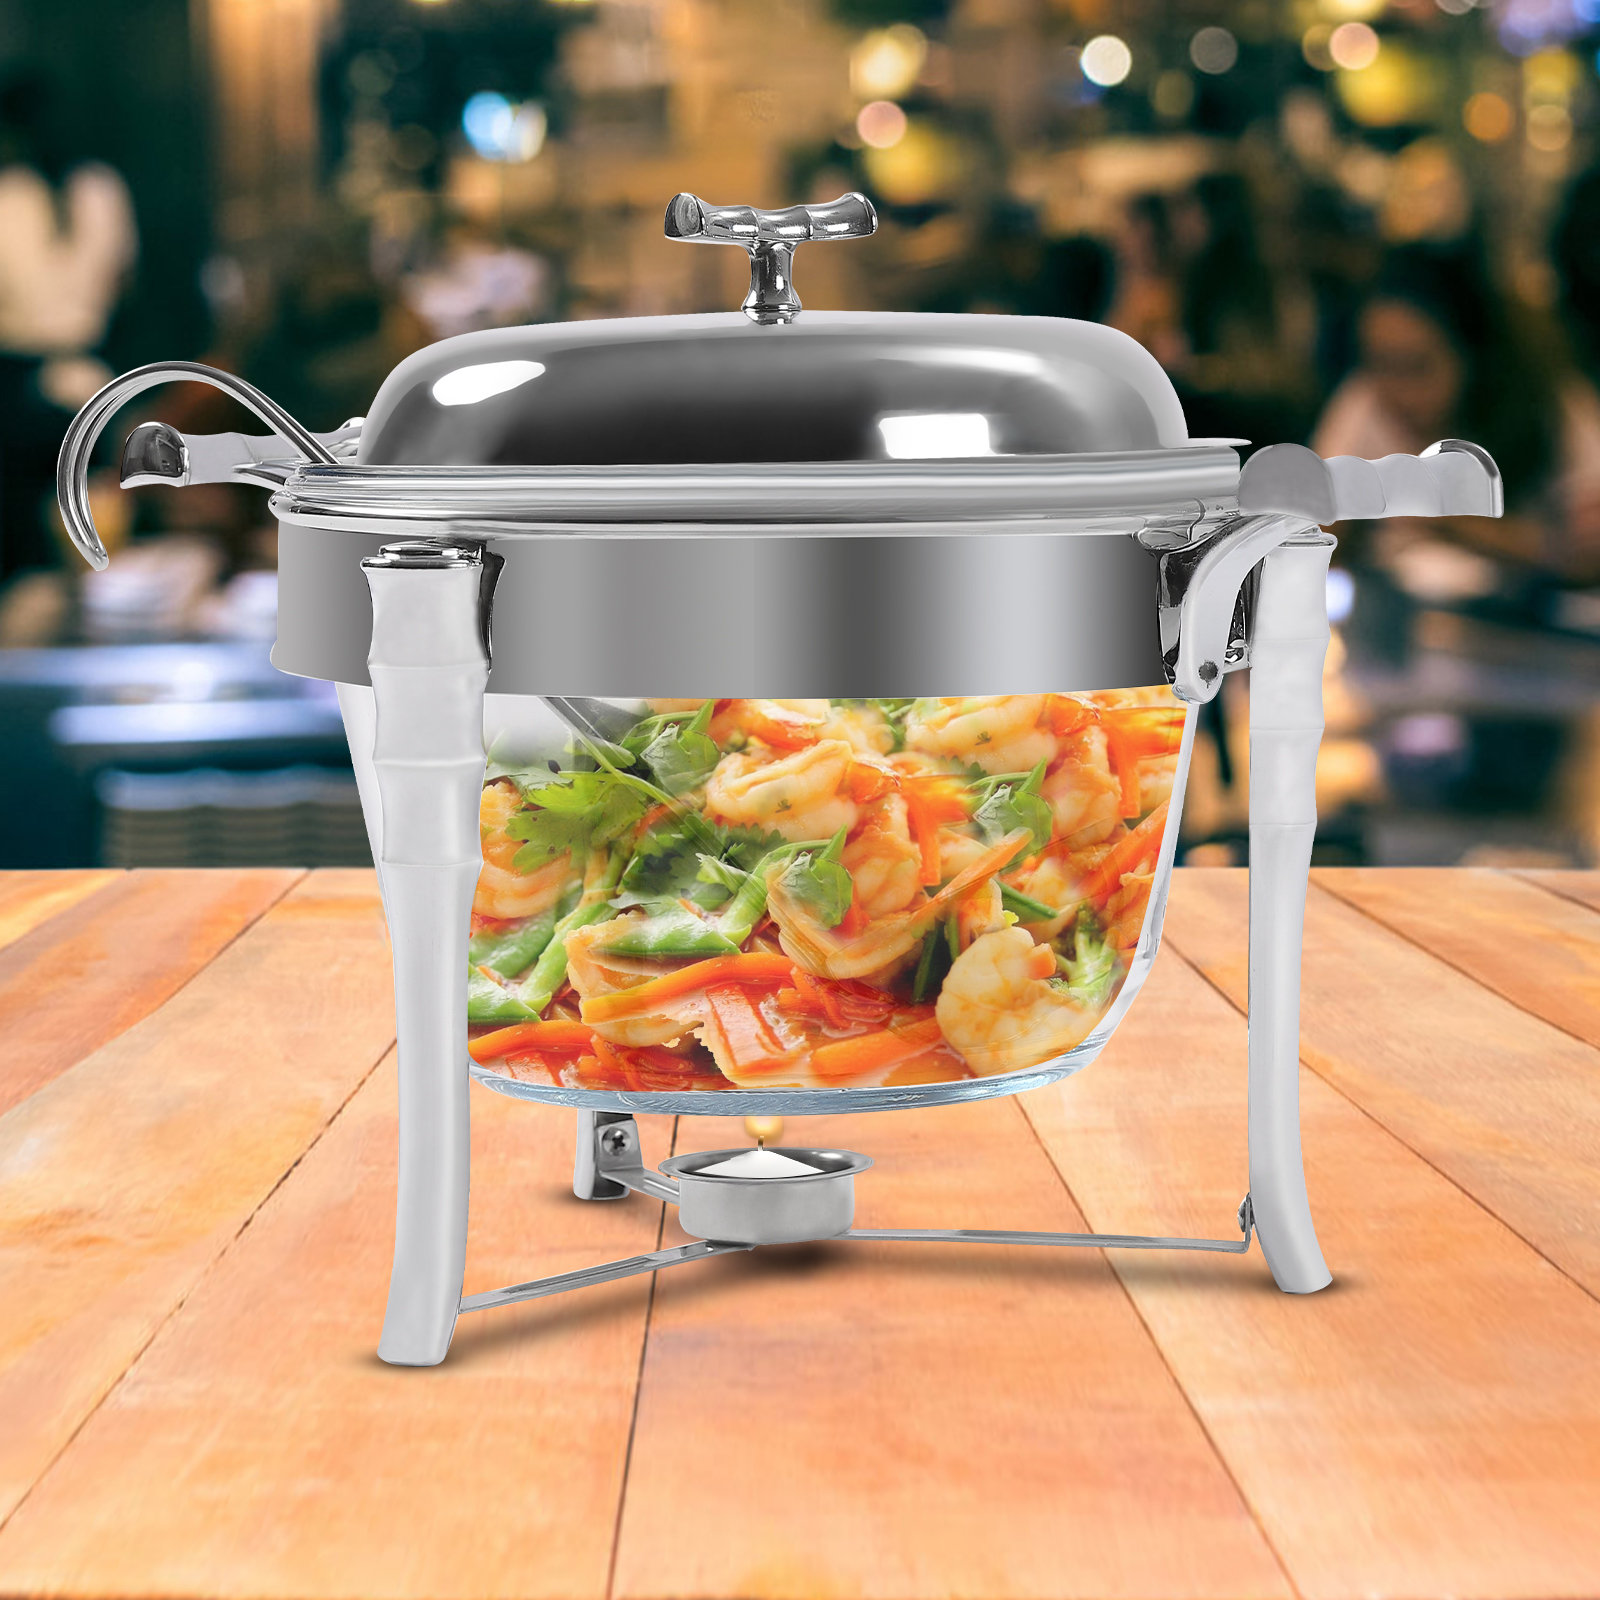 Disposable Chafing Dish Buffet Set - Set of 6 / 36pc - Half-Sized Catering  Chafers and Buffet Warmers, Buffet Server, Food Warmers for Parties,  Catering Supplies for Party - Includes Fuel Cans 